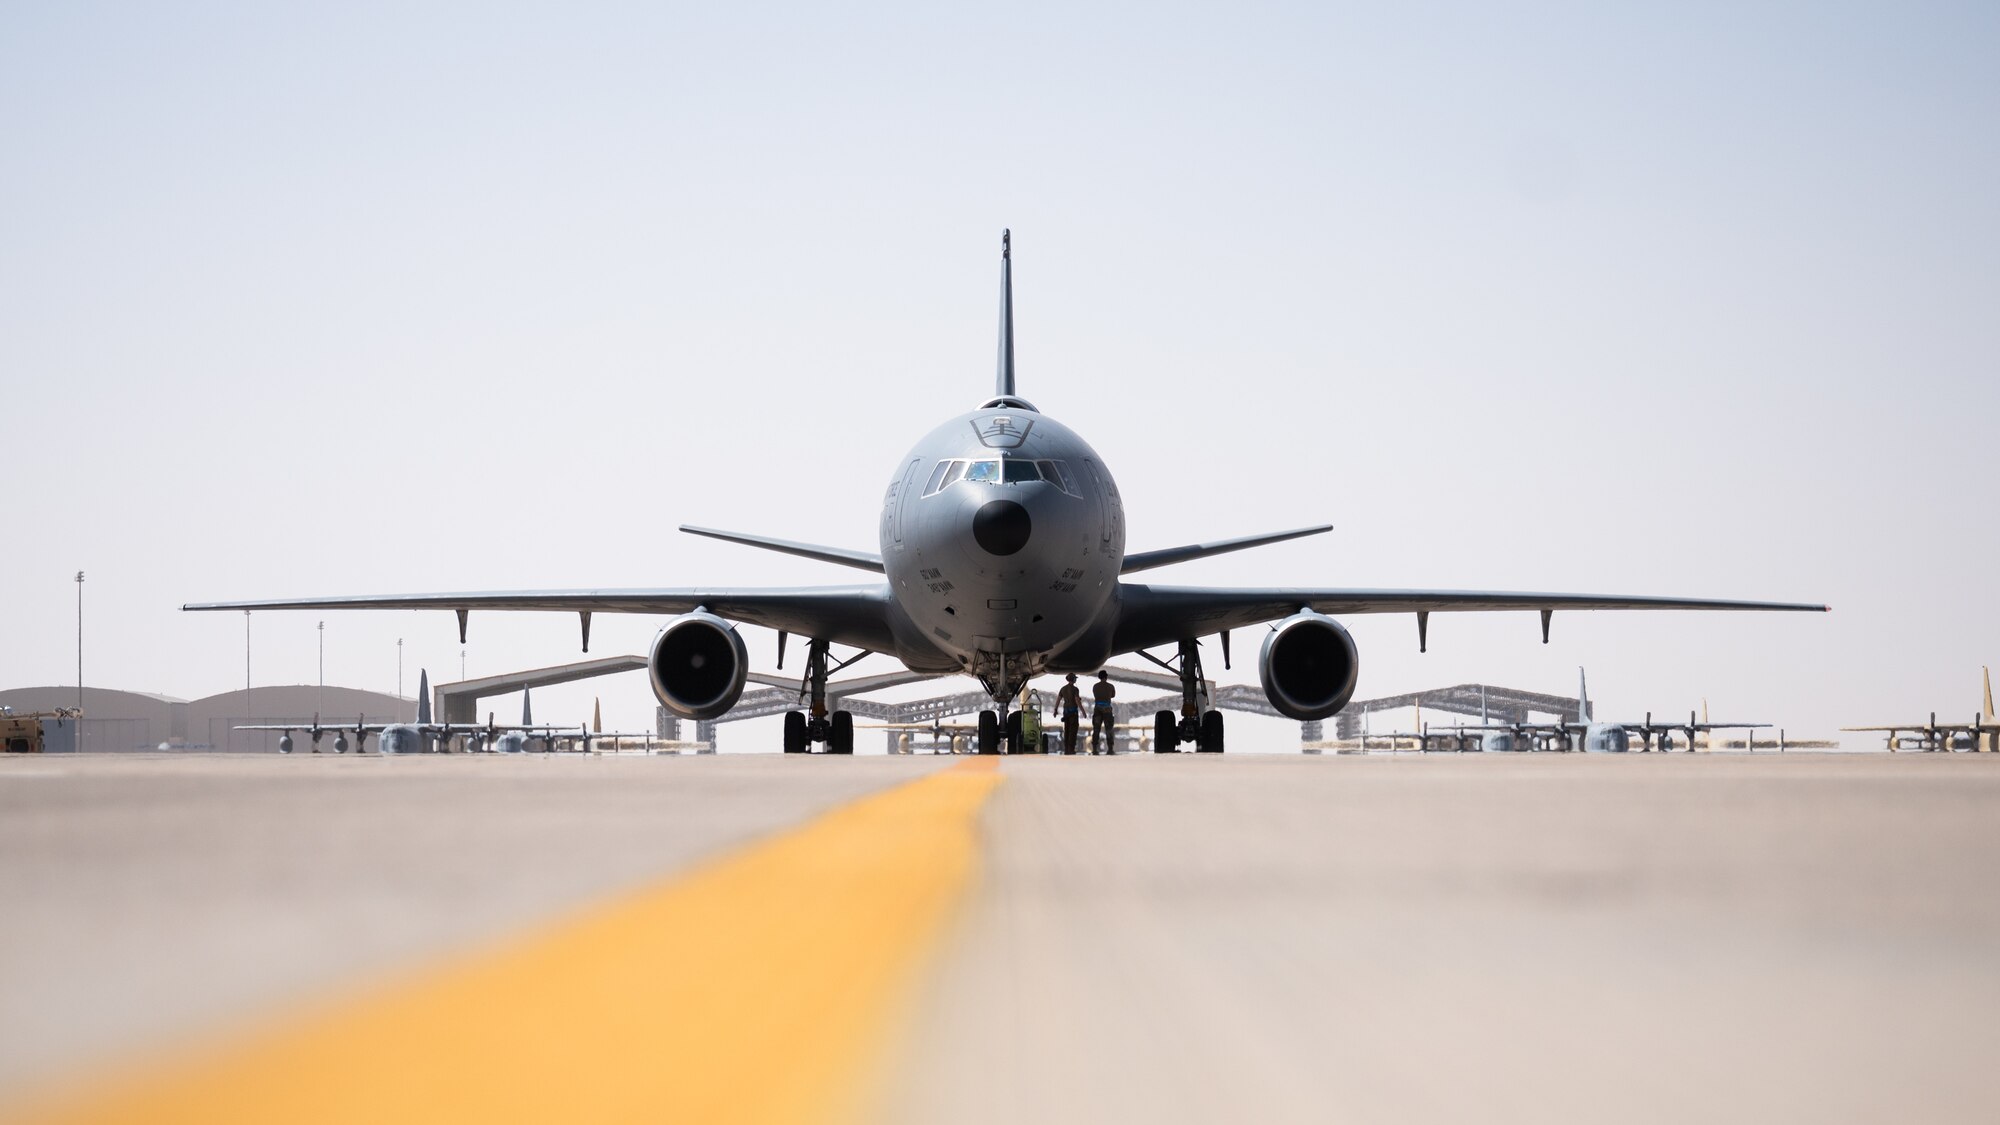 A U.S. Air Force KC-10 Extender assigned to the 908th Expeditionary Air Refueling Squadron taxis on the flight line at Prince Sultan Air Base, Kingdom of Saudi Arabia, March 3, 2022. The KC-10 is an advanced tanker and cargo aircraft that delivers Ninth Air Force (Air Forces Central)’s global reach aerial refueling capability to support joint and partner nation aircraft throughout the U.S. Central Command area of responsibility. (U.S. Air Force photo by Senior Airman Jacob B. Wrightsman)